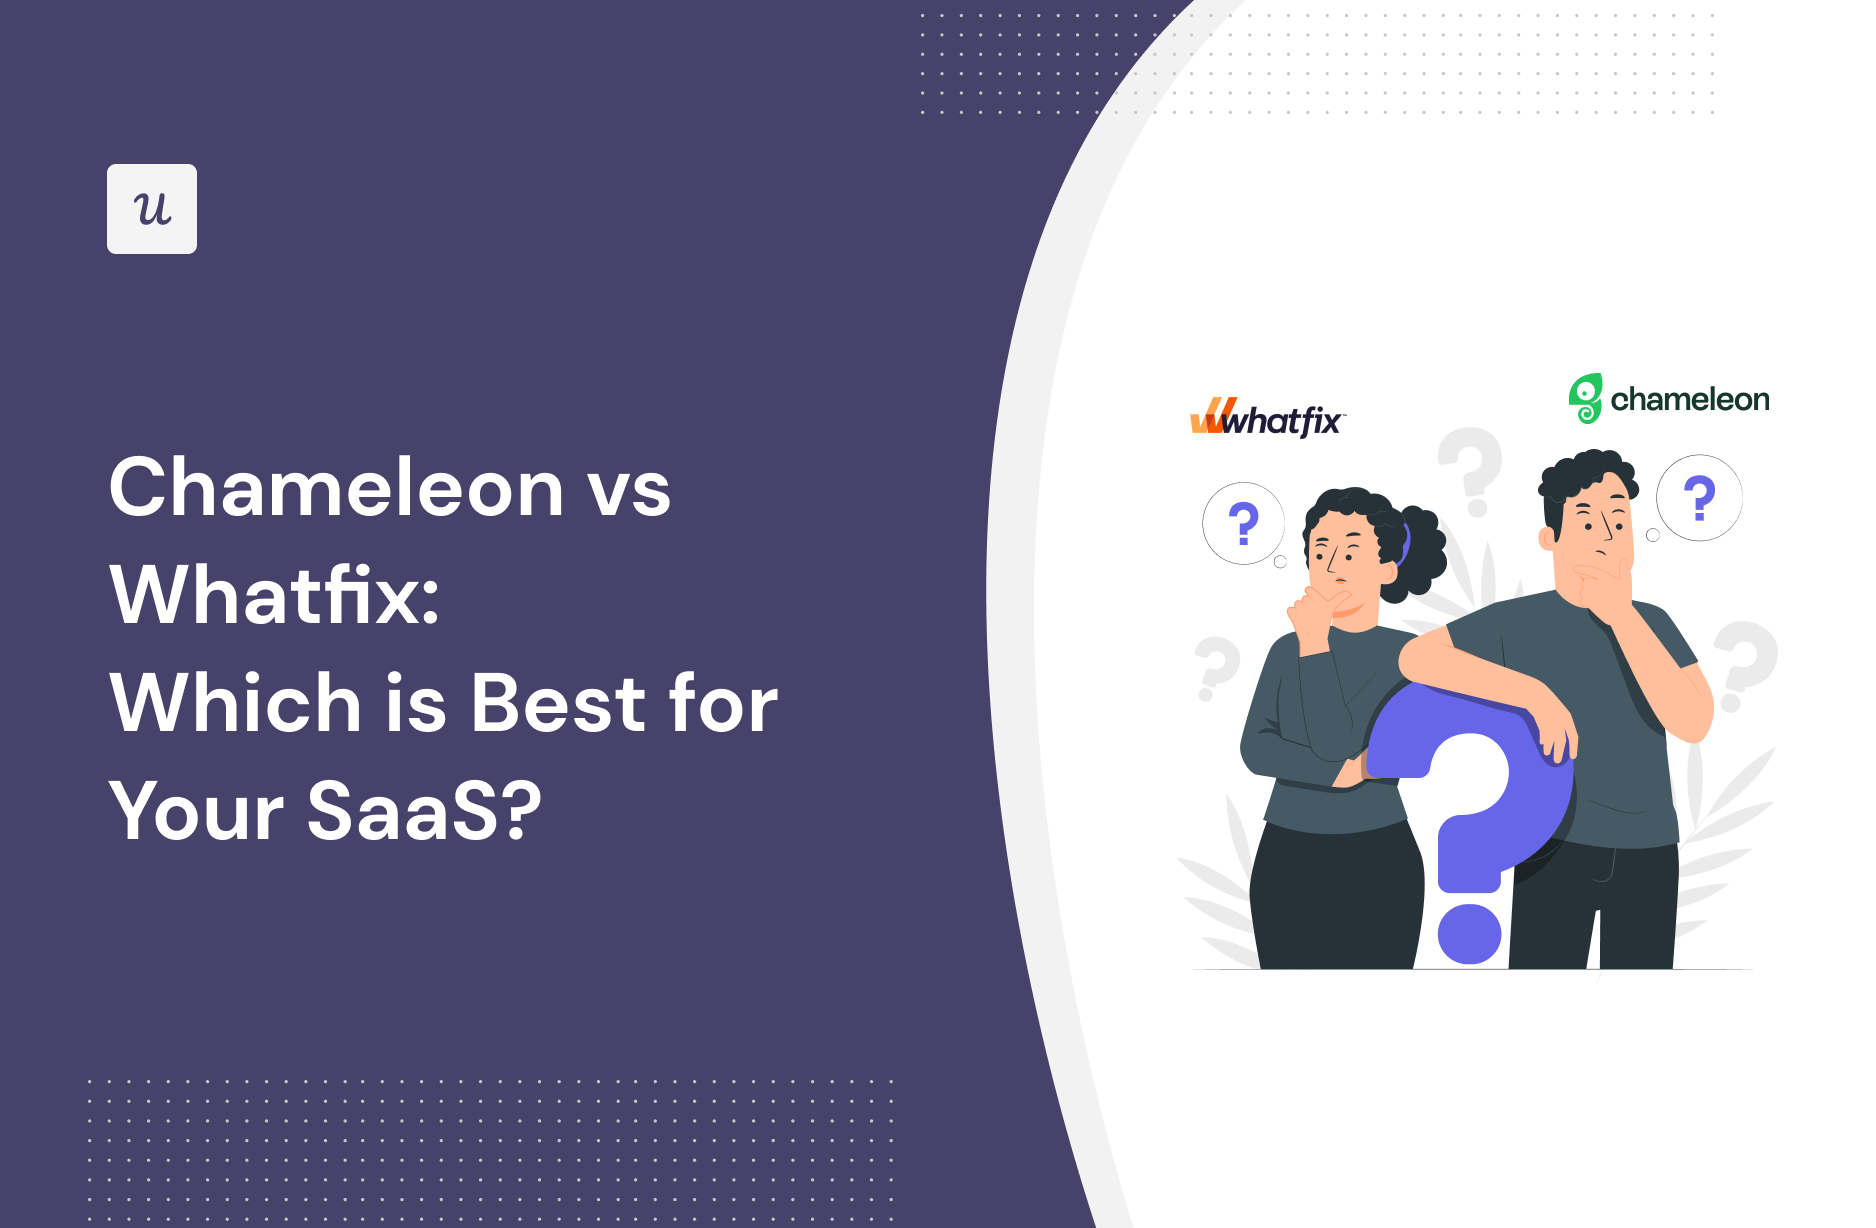 Chameleon vs Whatfix: Which Is Best for Your SaaS?